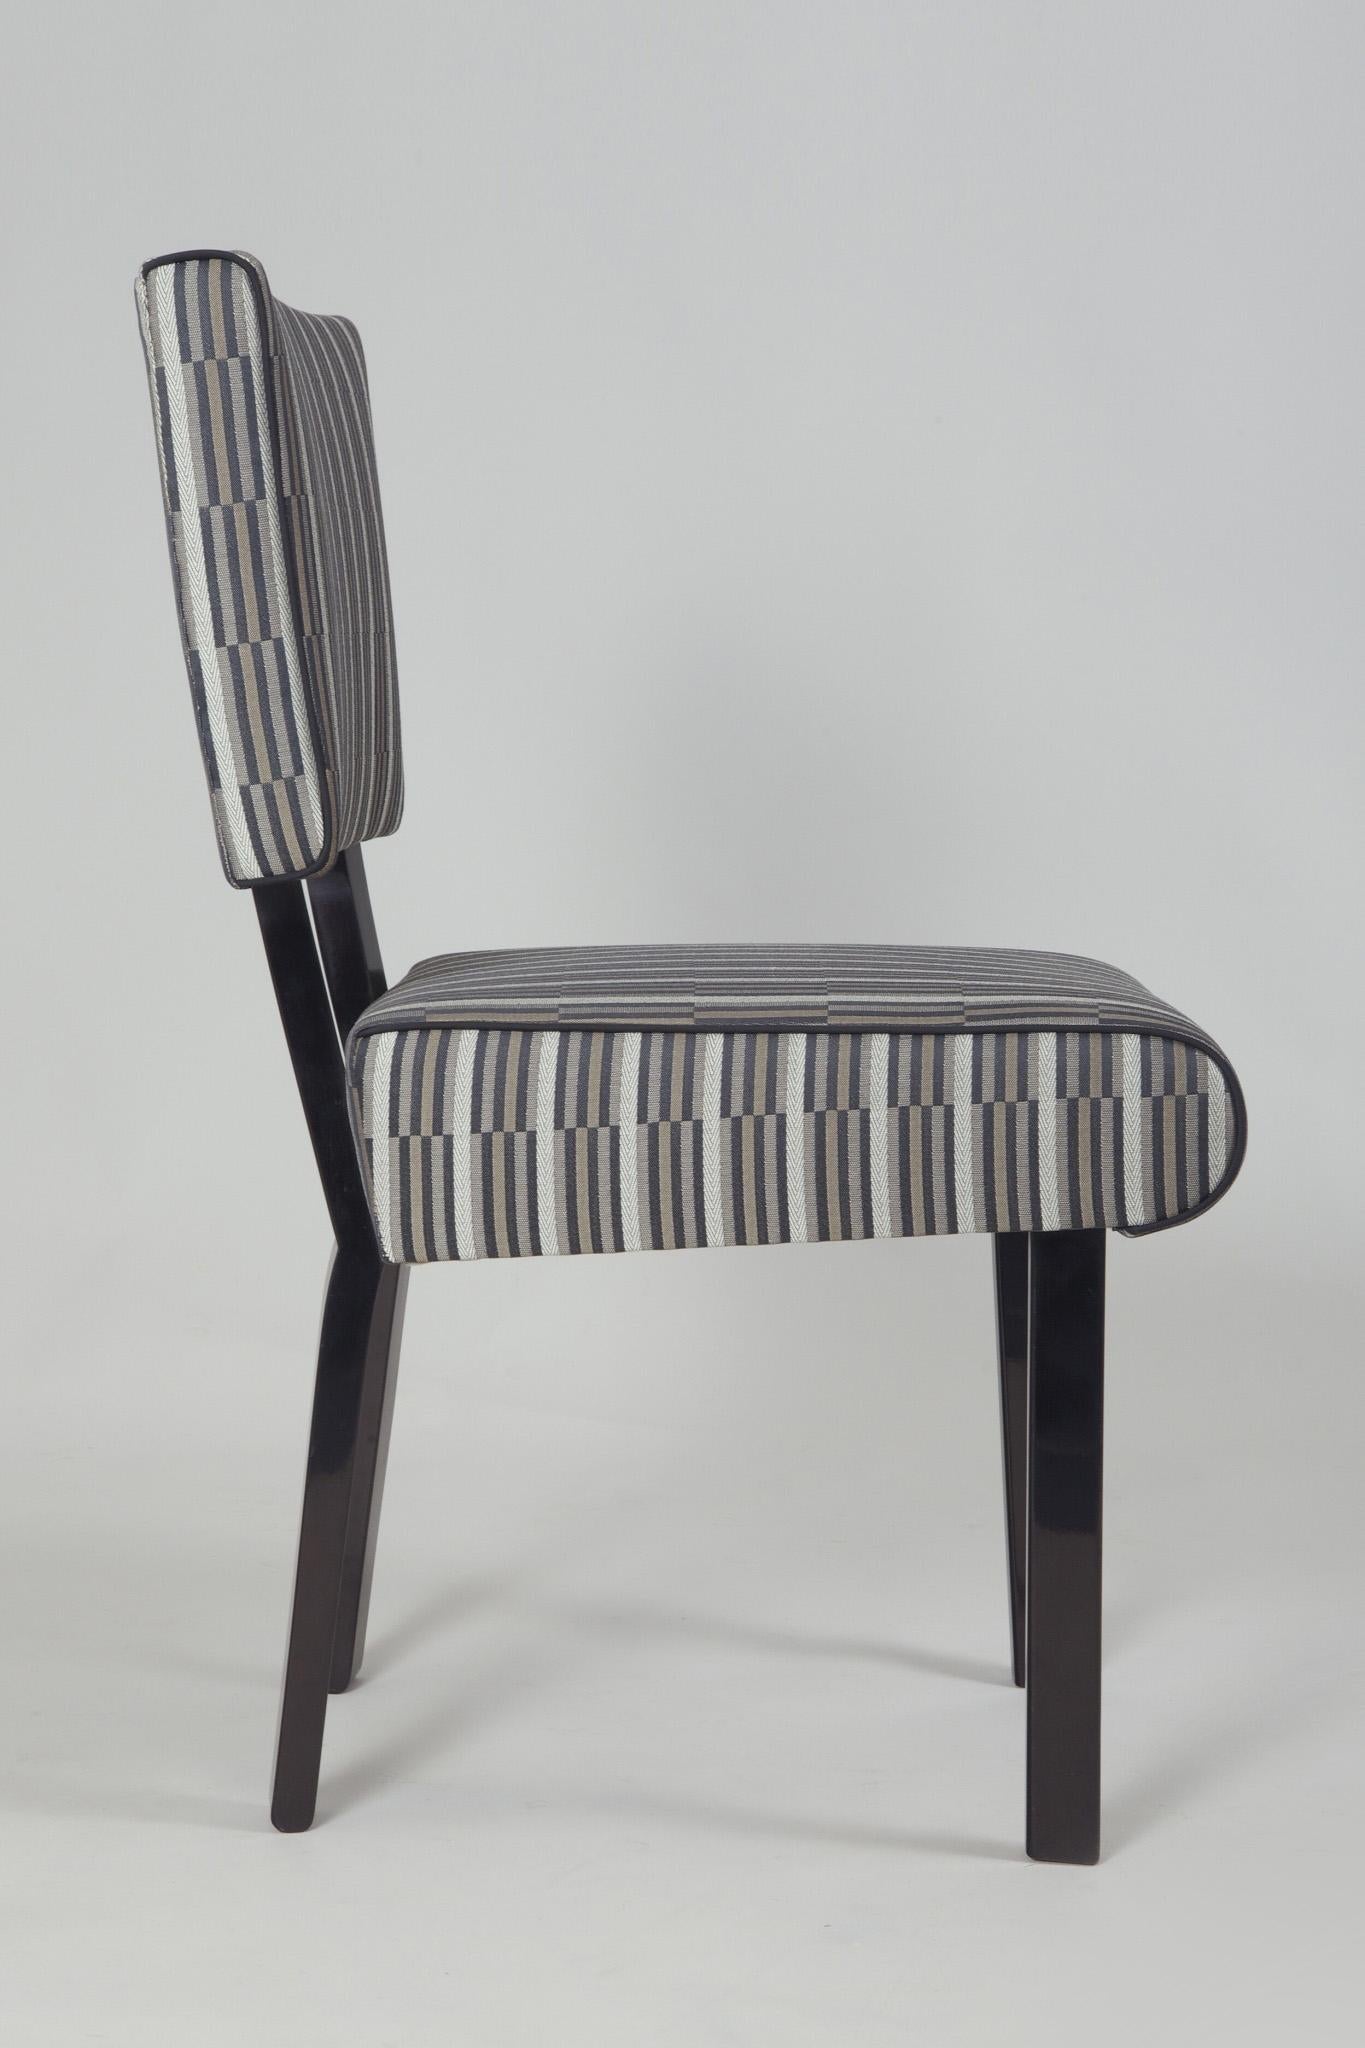 Ebonized Set of Six Art Deco Chairs Made in 1930s Czechia, Fully Refurbished For Sale